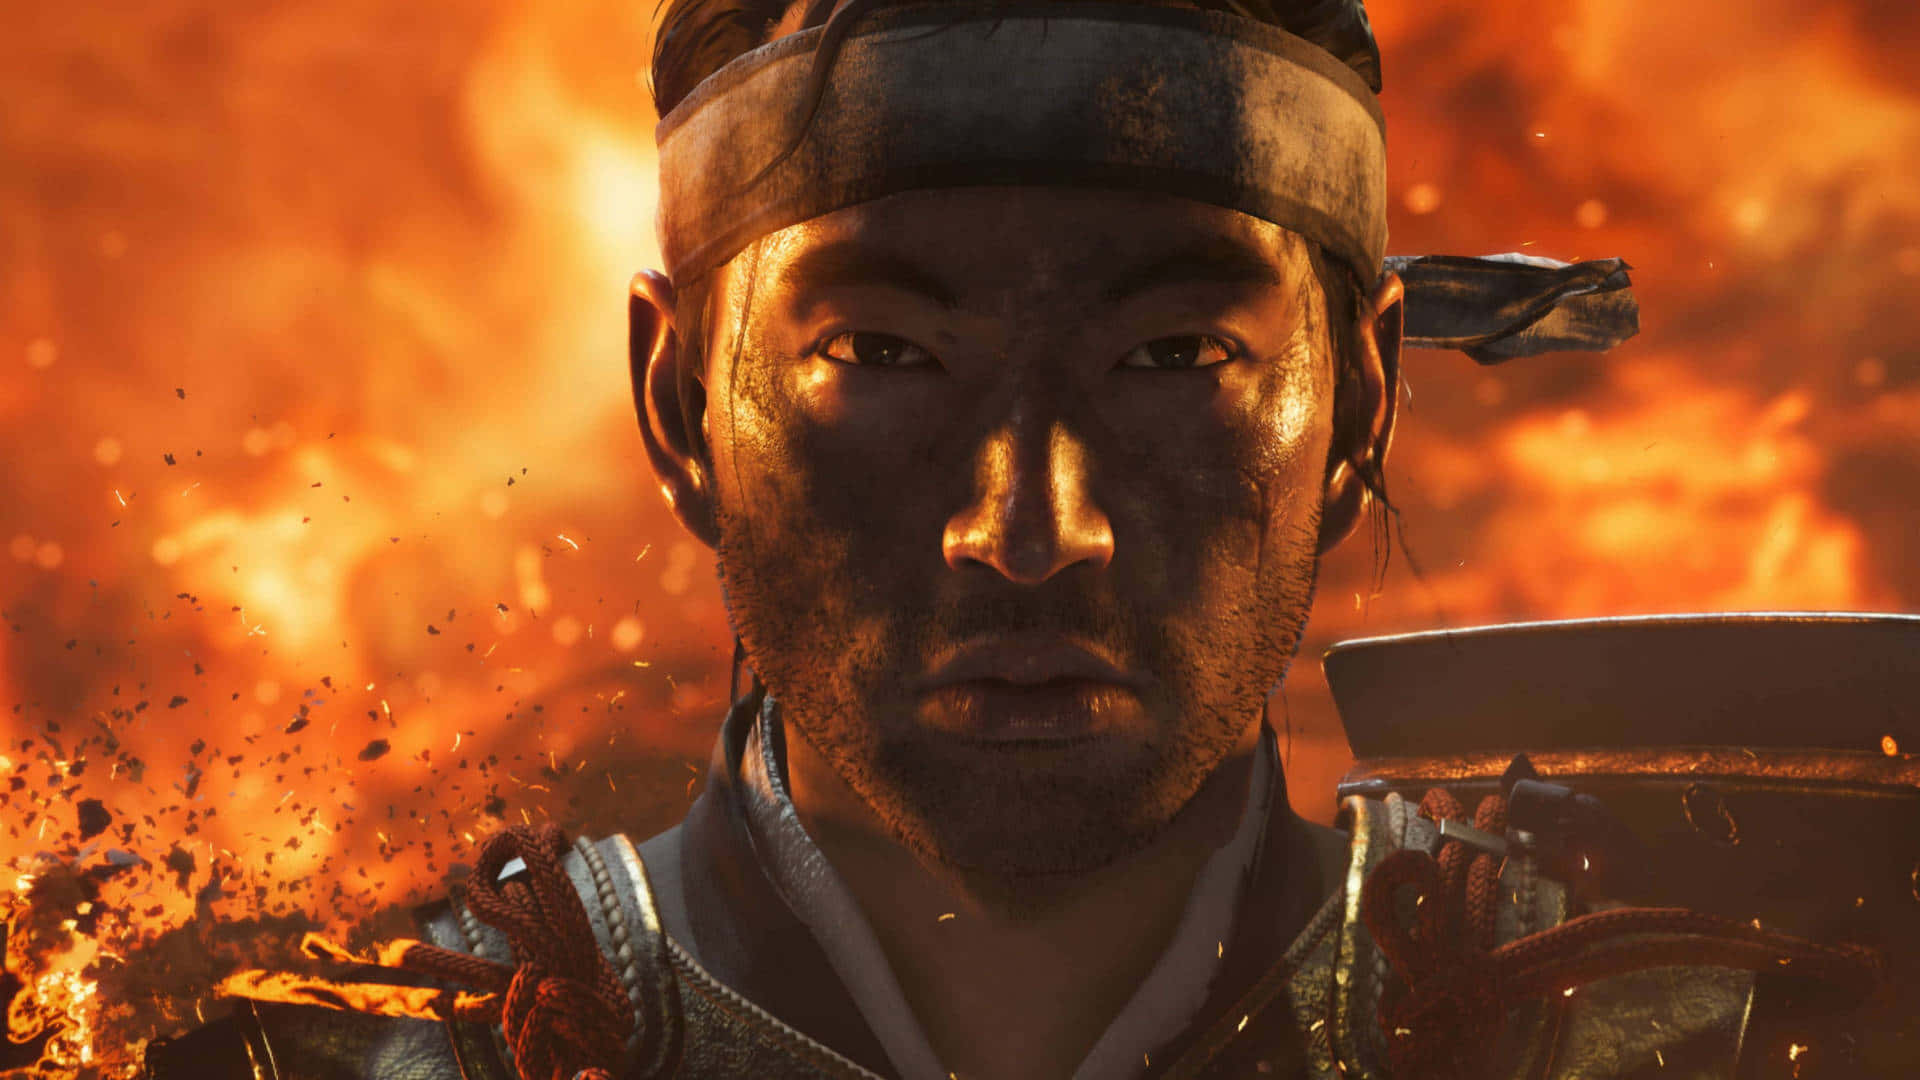 "Defend what is right. Stand against evil. Be the hero." - Ghost of Tsushima